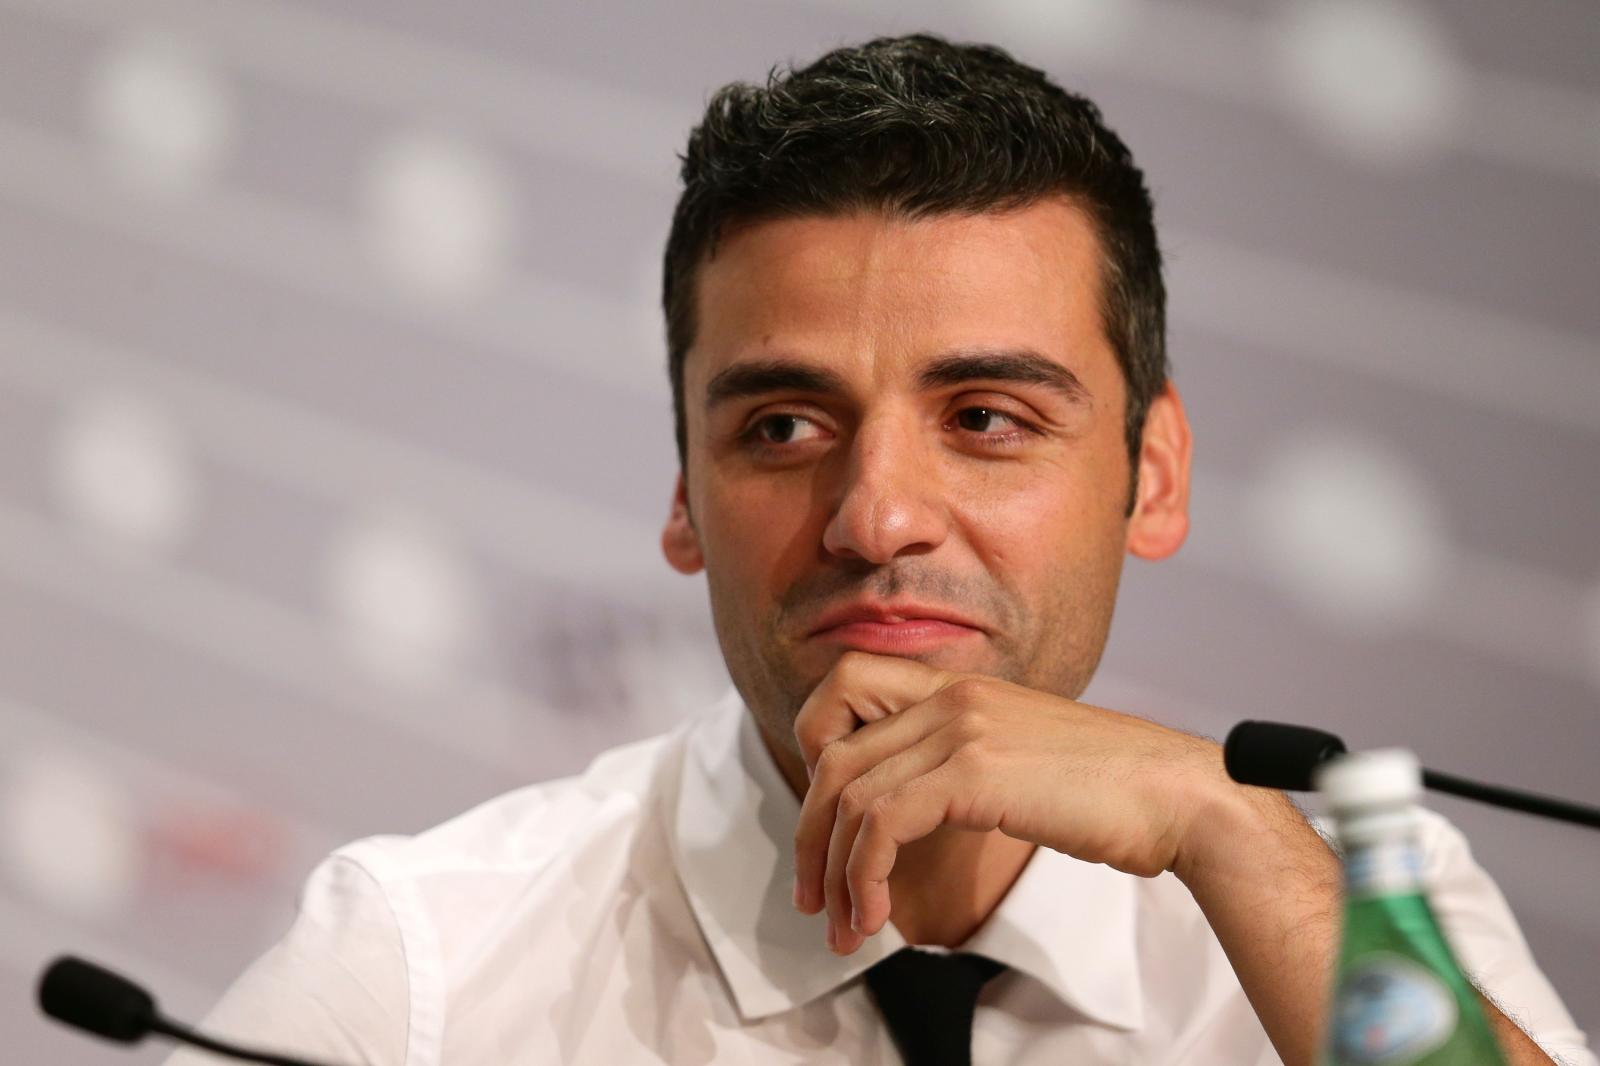 It’s Official! Star Wars VII Cast Confirmed, Includes Oscar Isaac